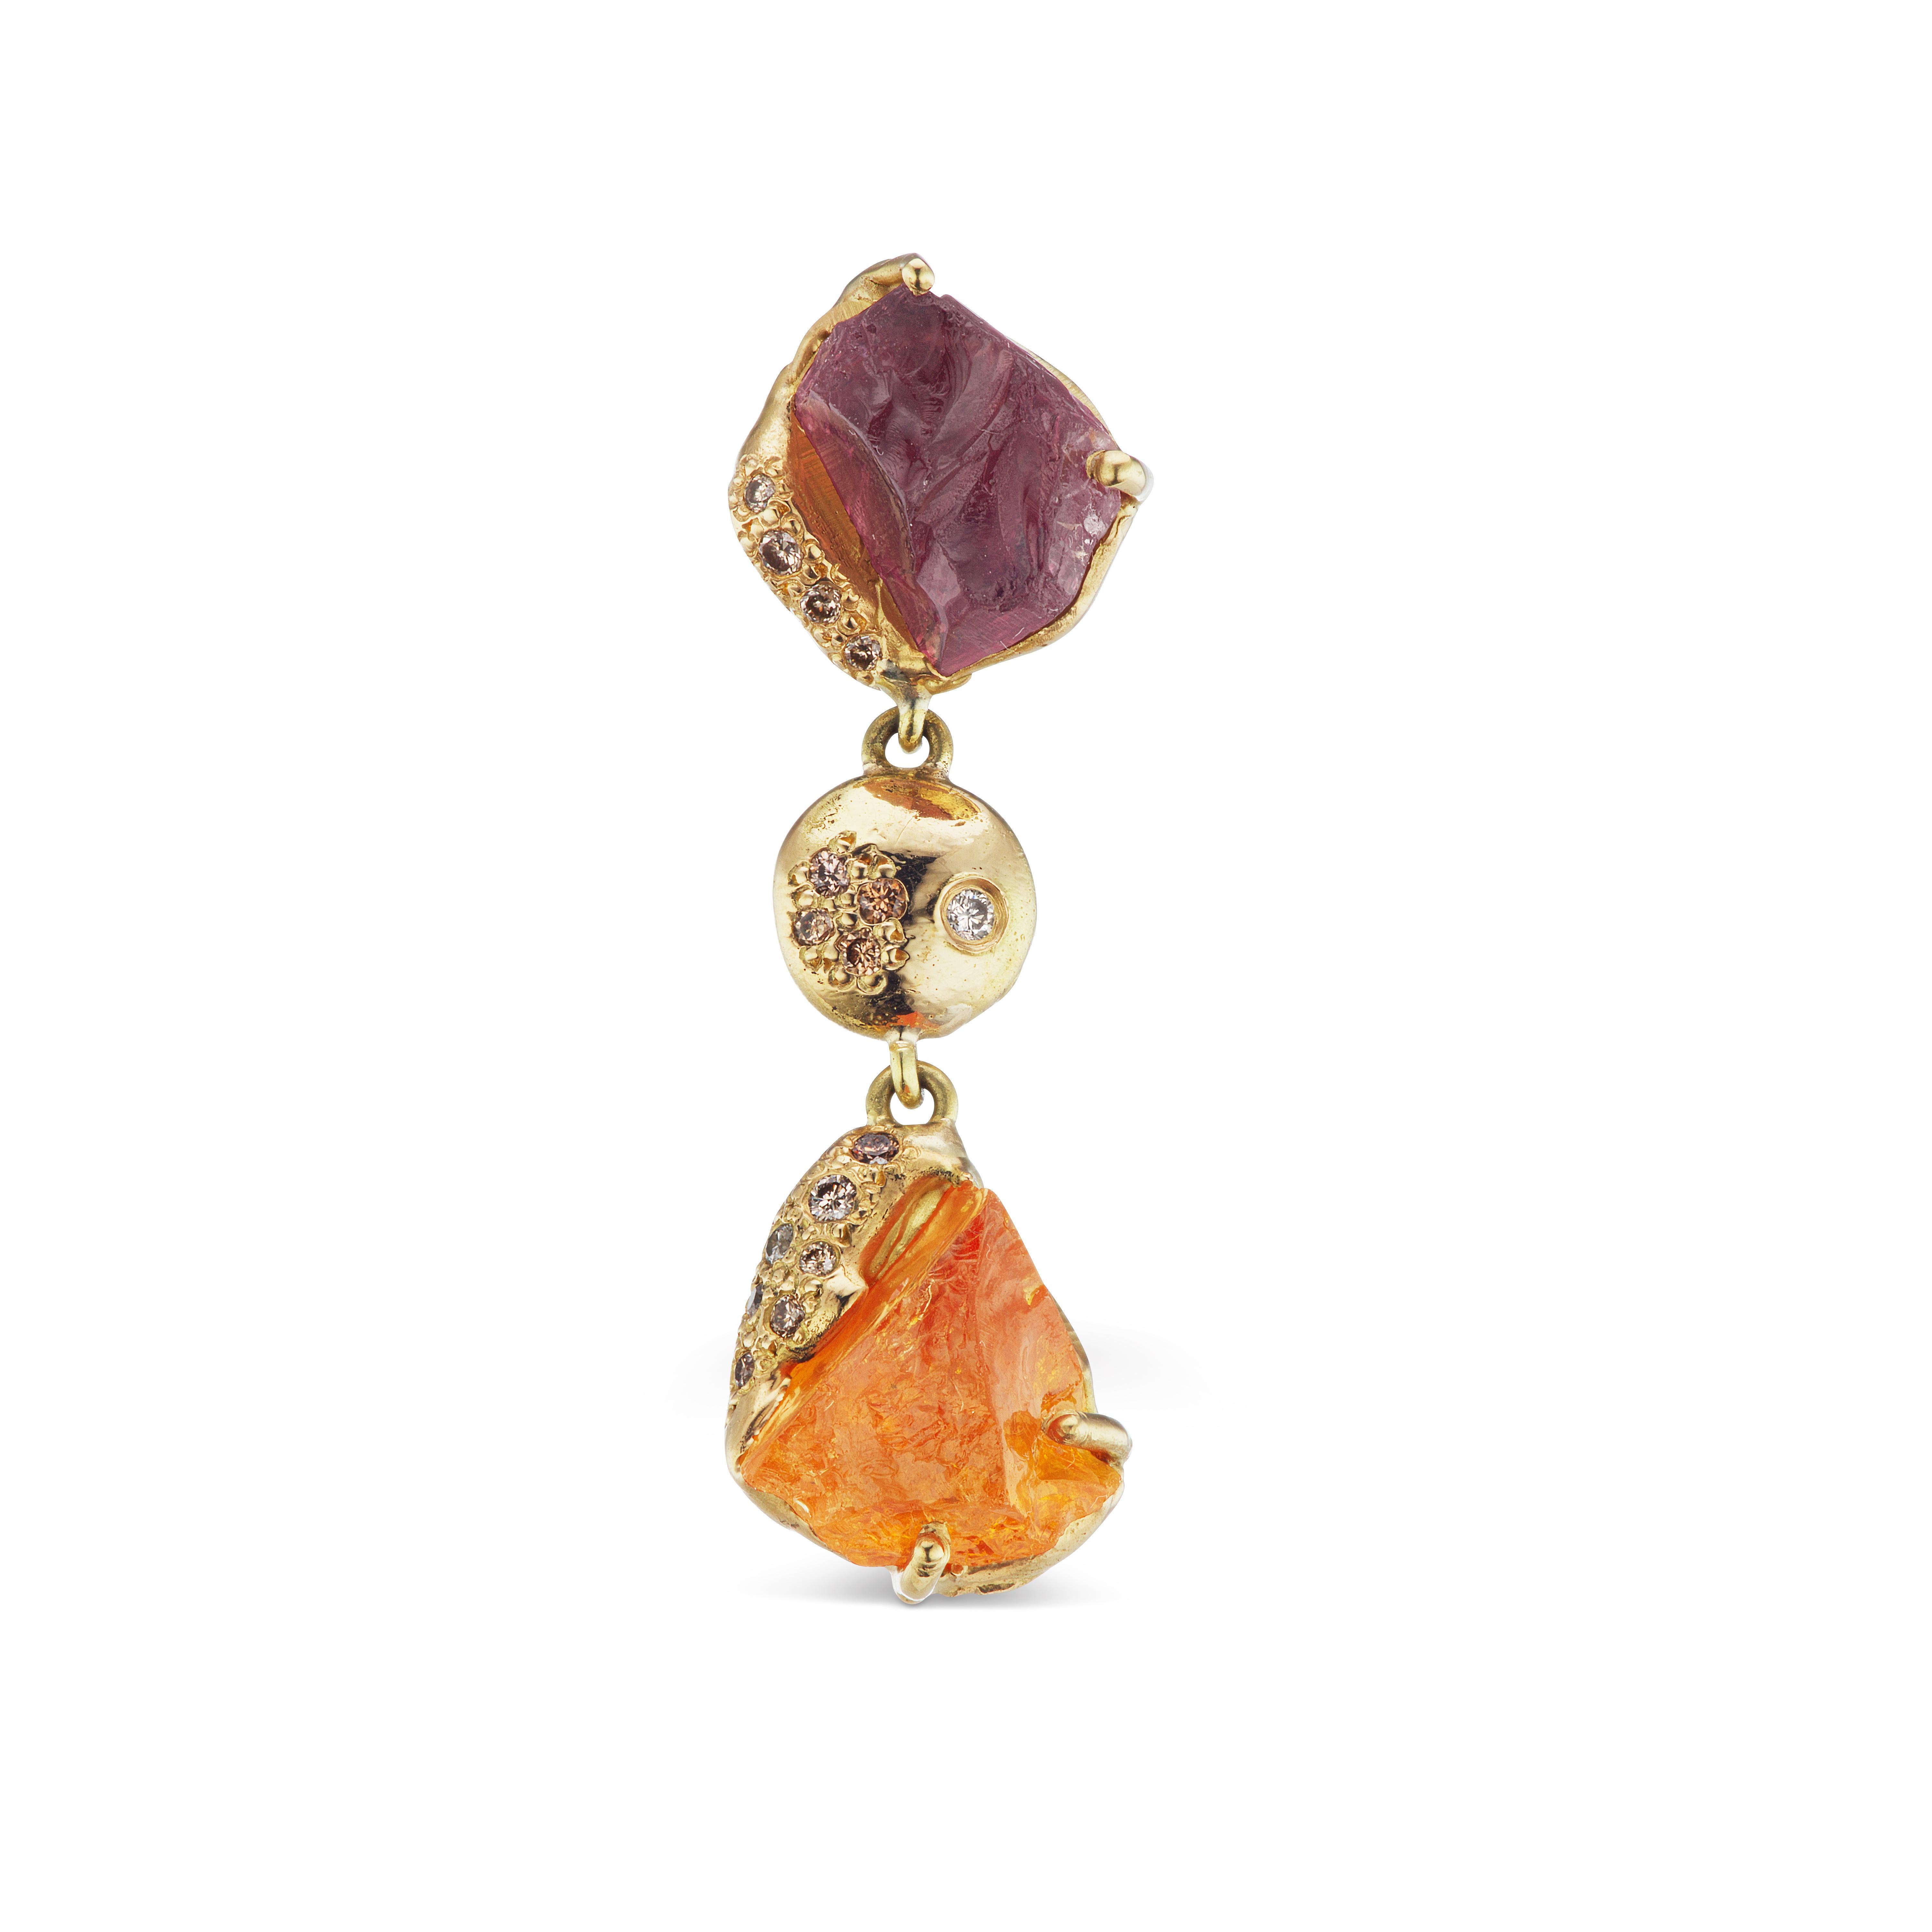 The one-of-a-kind Rachel earrings are hand-crafted in 18-karat recycled yellow gold, and feature two untreated, Tenda Cut, natural color orange spessartine garnet (also called spessartite); two untreated, Tenda cut, natural color pink tourmaline;